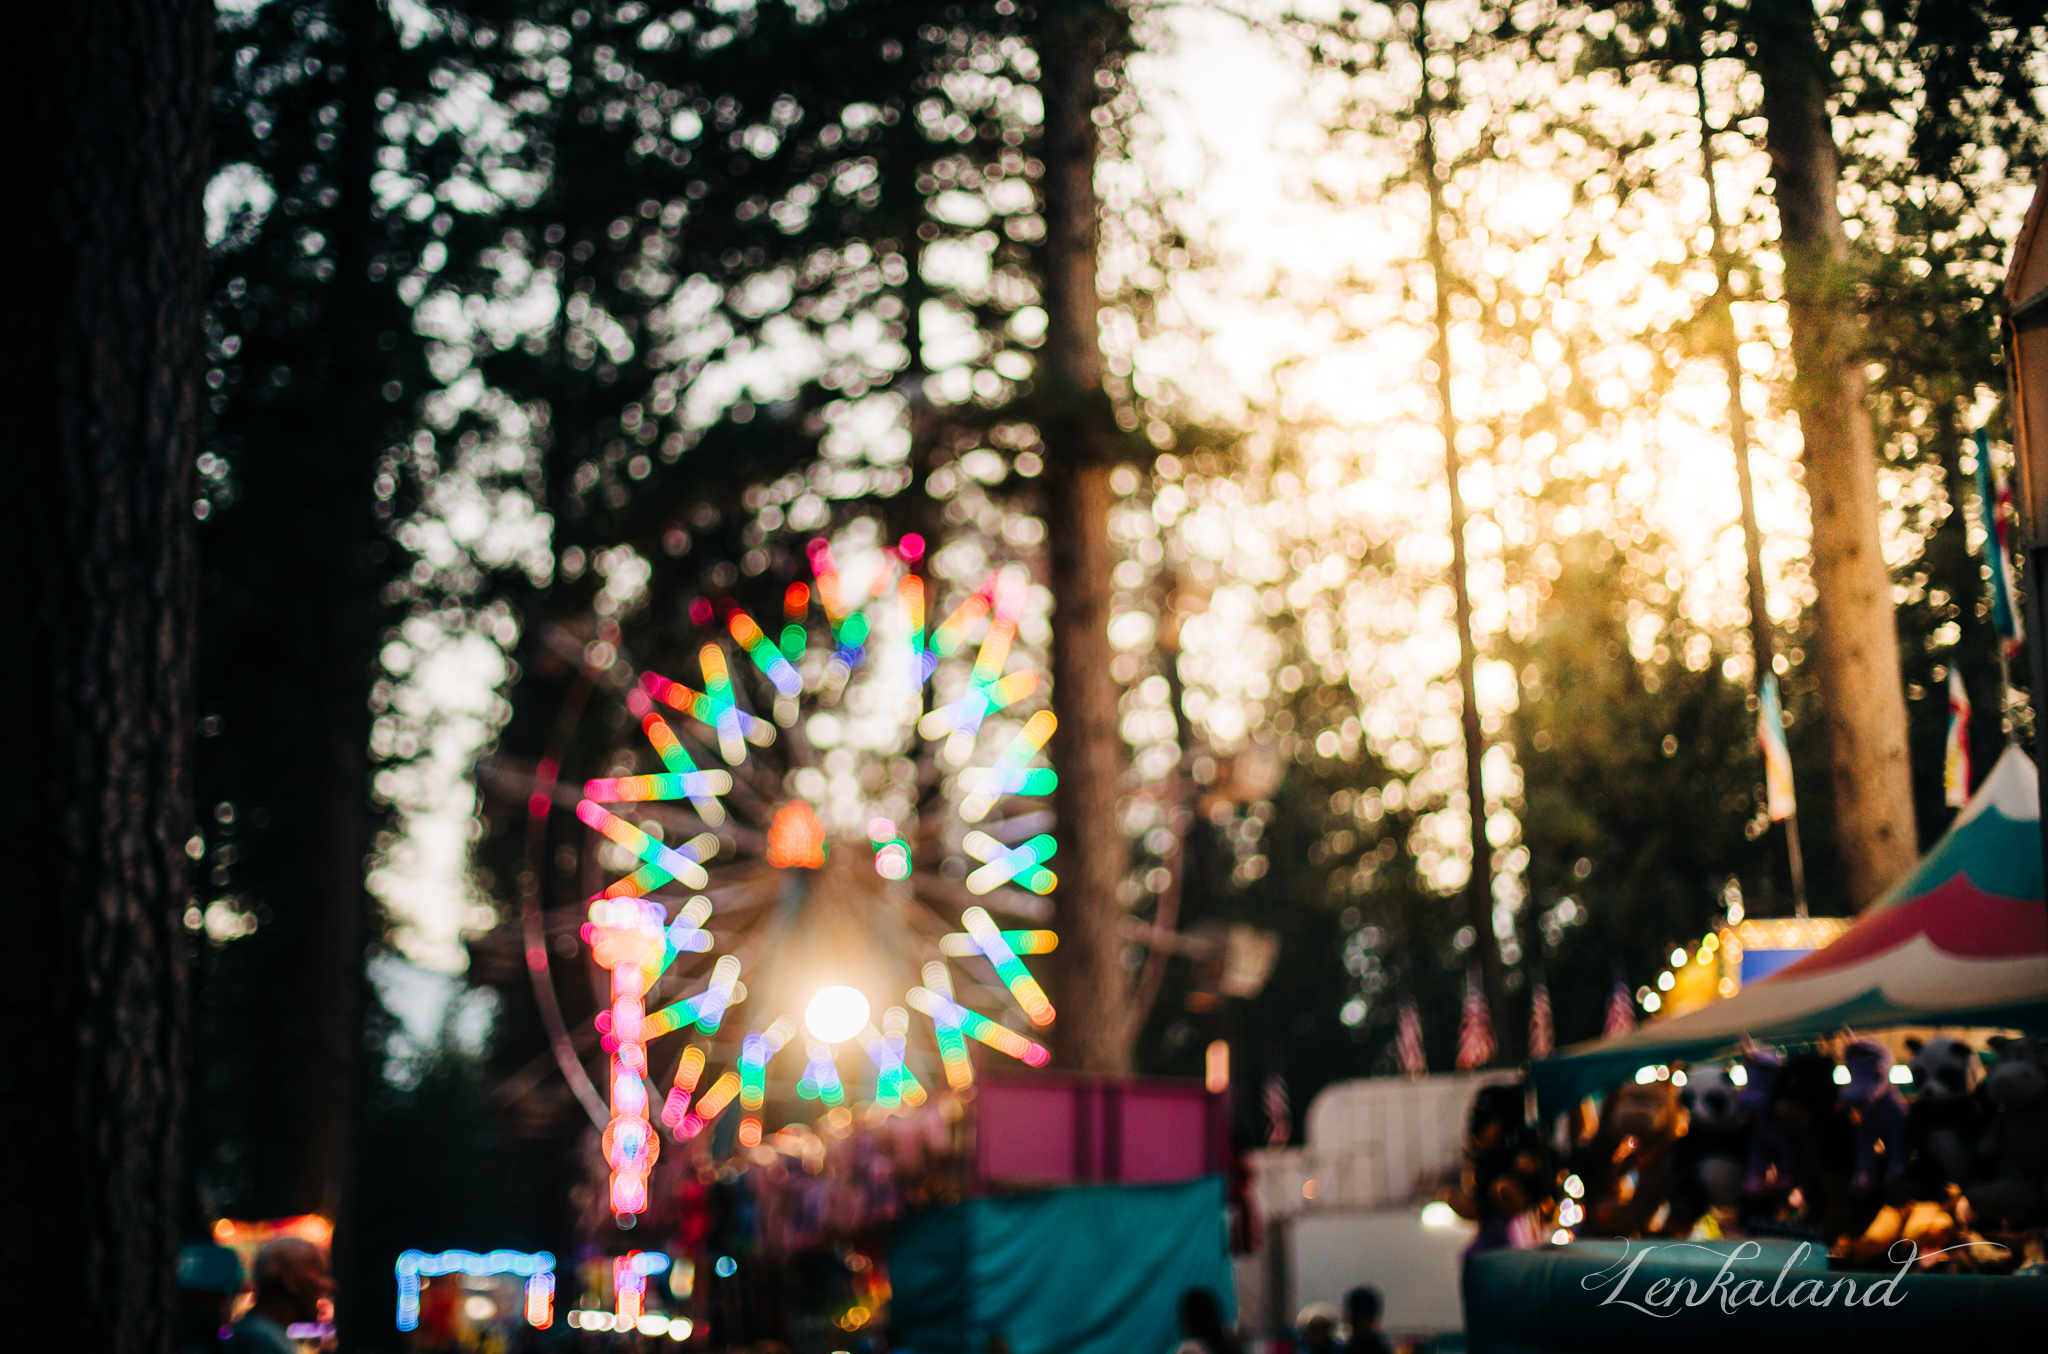 Country Fair Midway at the Nevada County Fair with Lenkaland Photography